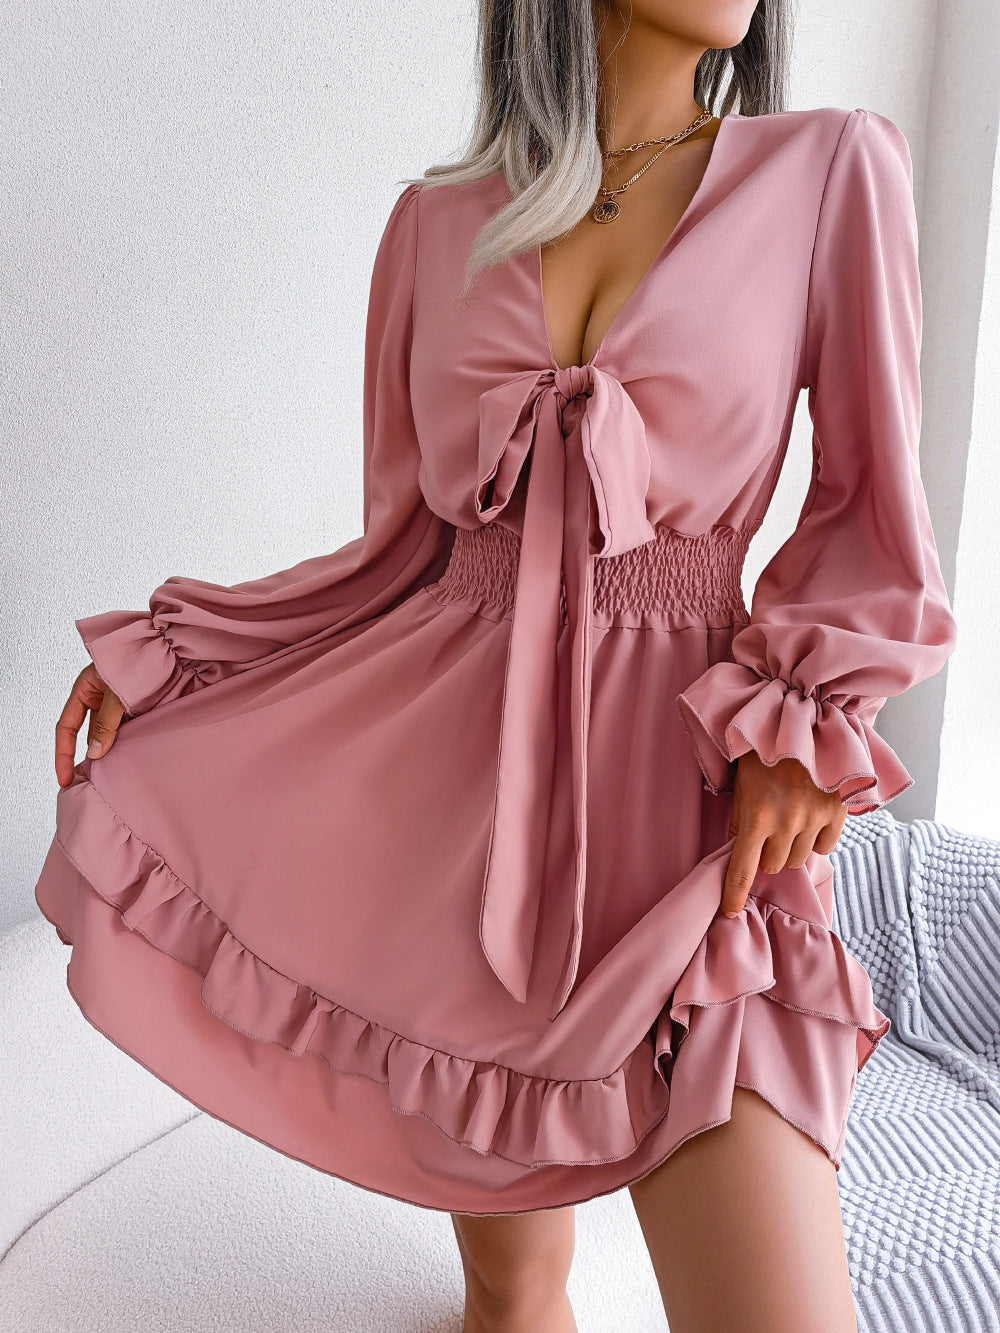 Spring/Summer Women's Clothes Casual Lace Up Waist Swing Dress